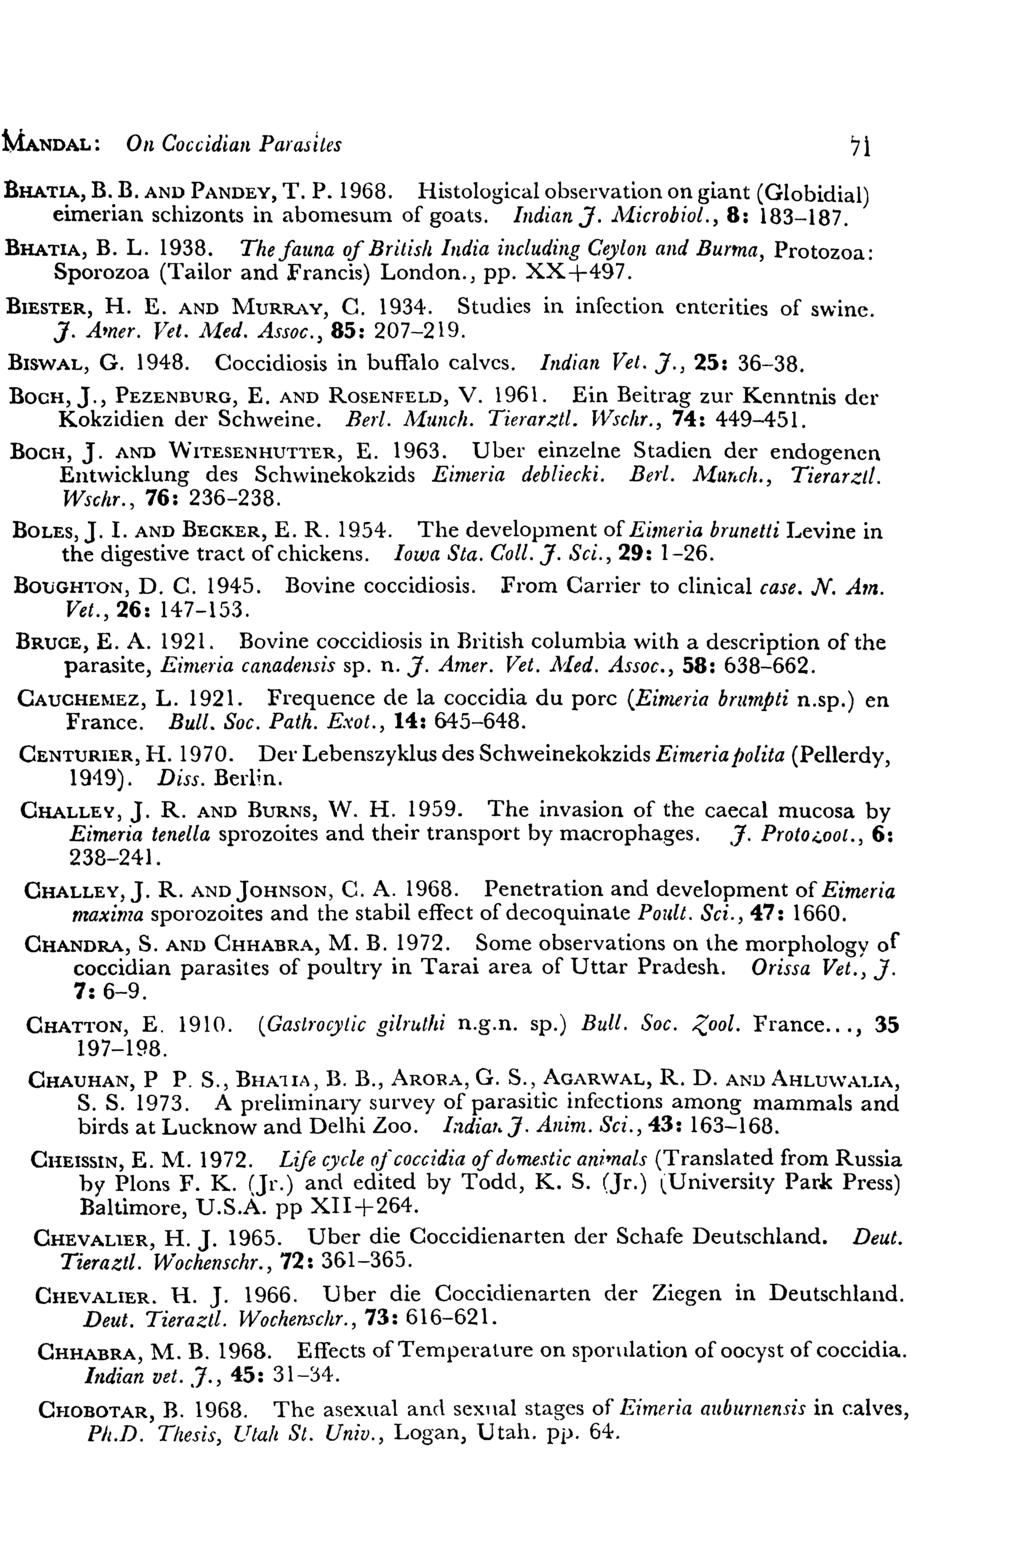 MANDAL: On Coccidian Parasites 71 BHATIA, B. B. AND PANDEY, T. P. 1968. Histological observation on giant (Globidial) eimerian schizonts in abomesum of goats. Indian J.. A!icrohiol., 8: 183-187.